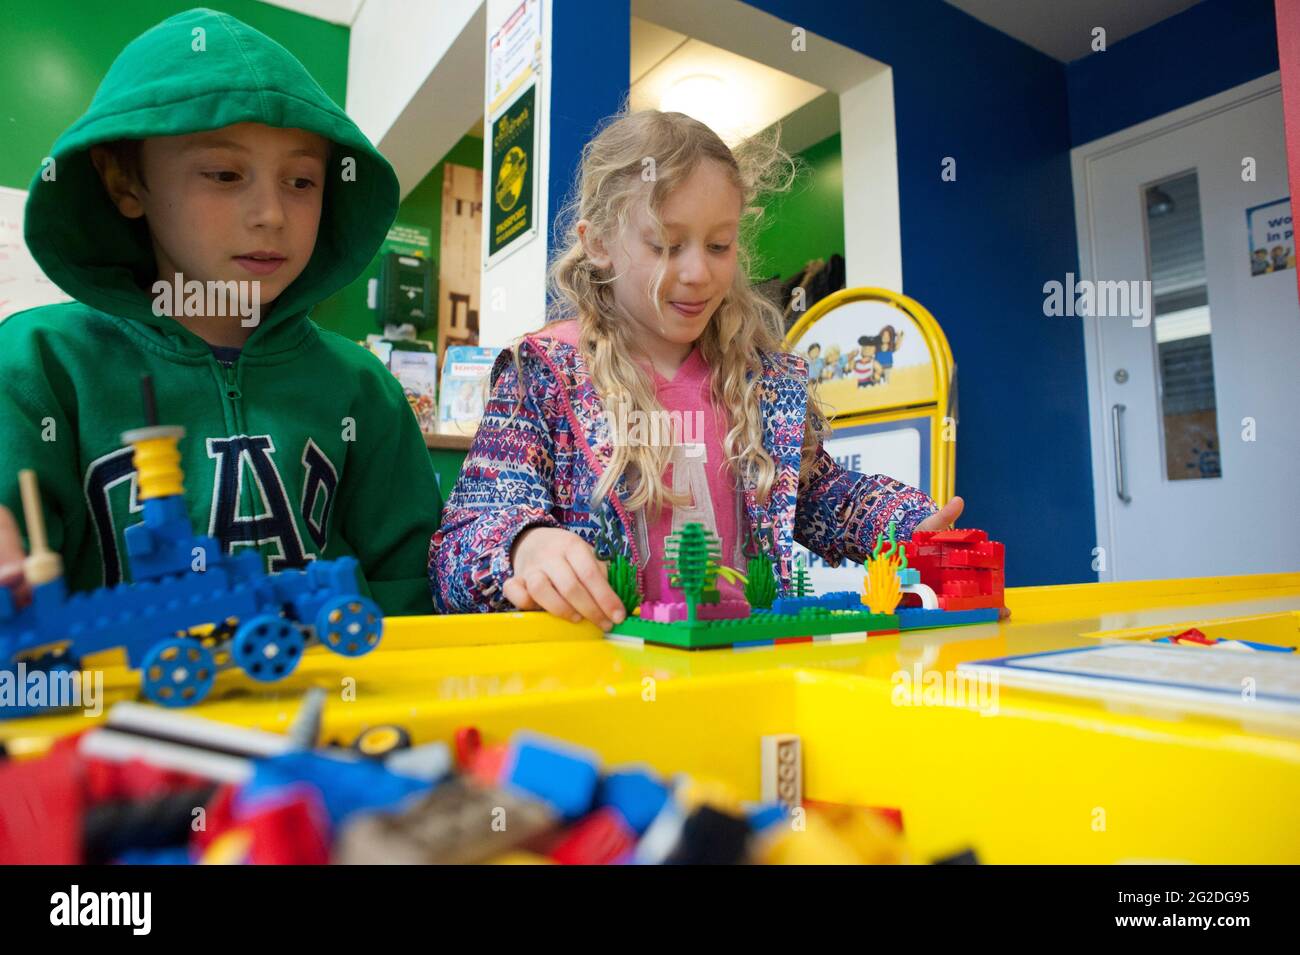 Kids playing with lego toys Stock Photo